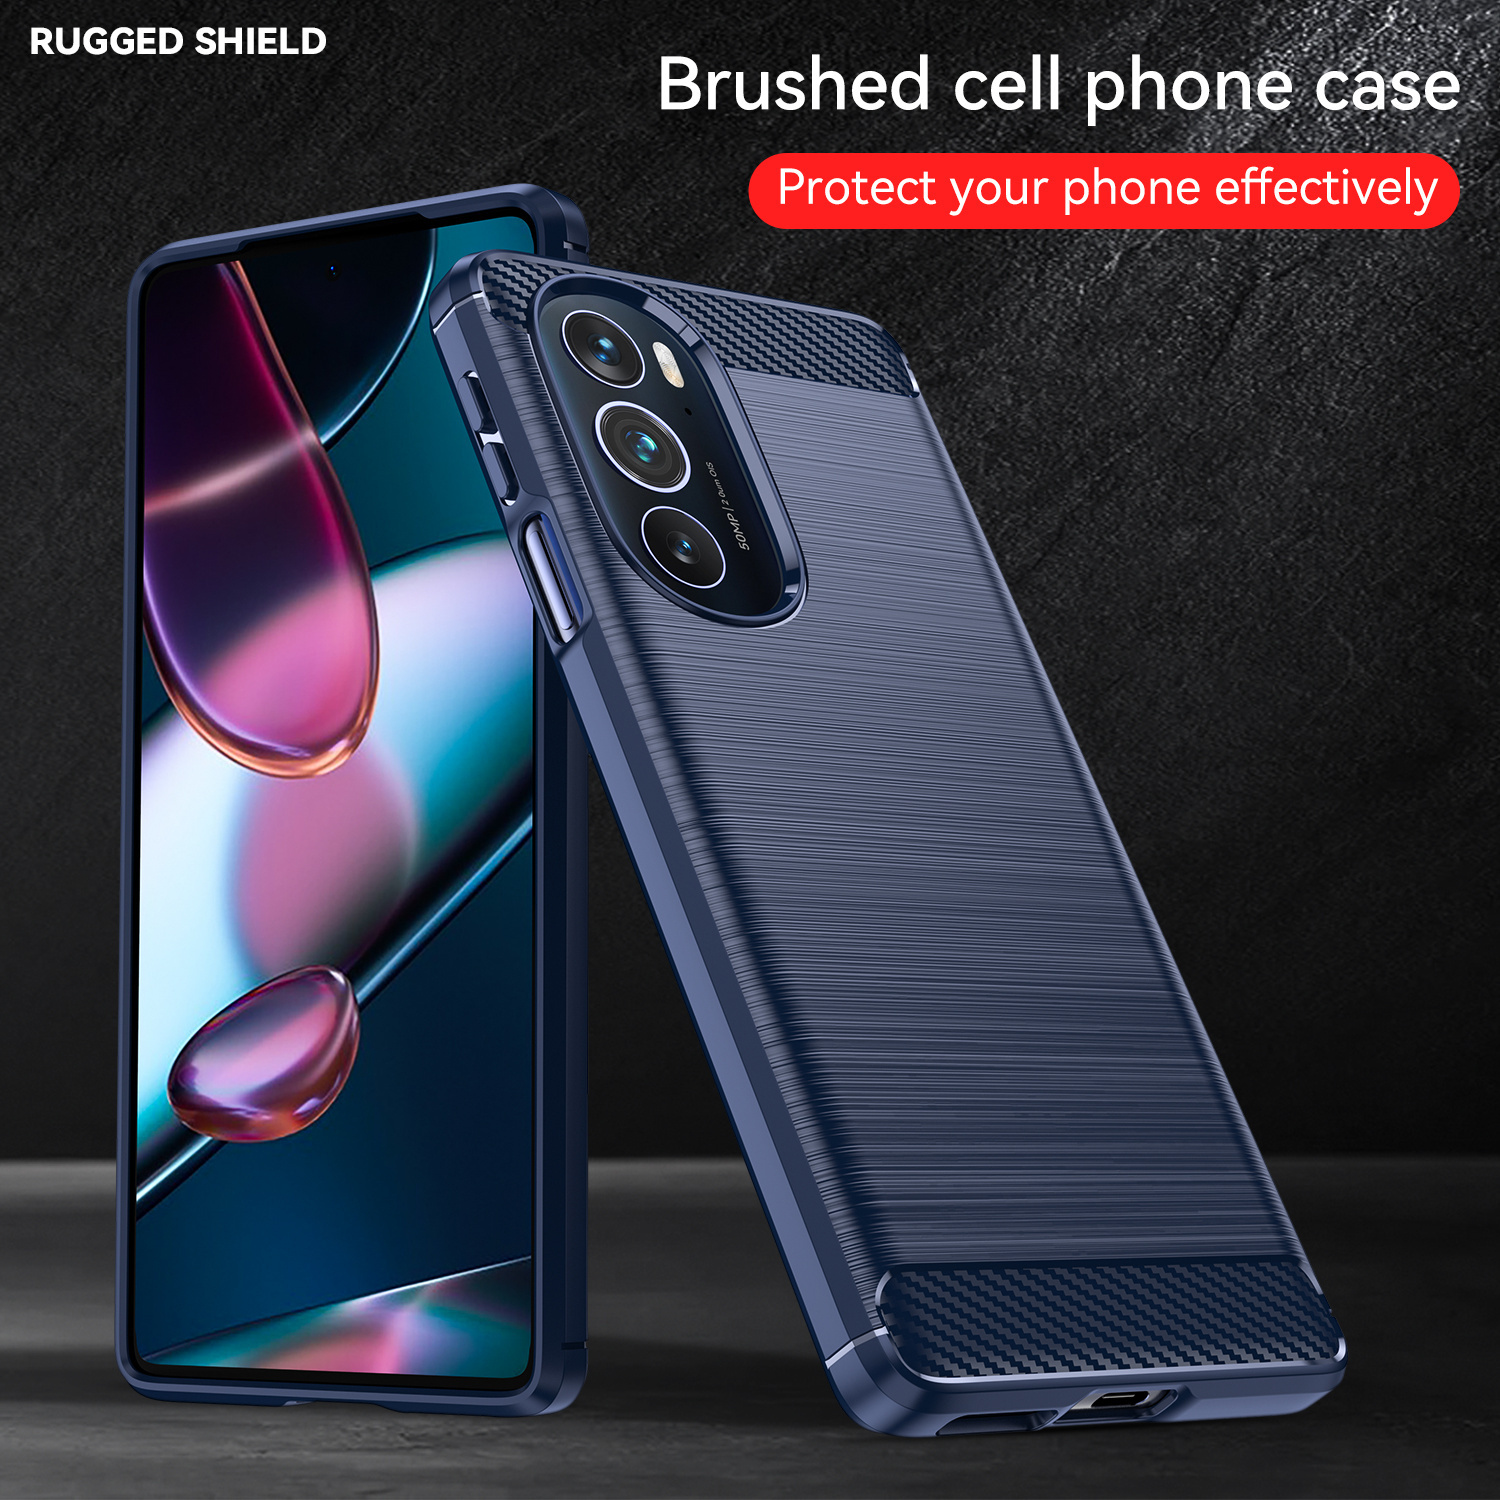 

Moto Edge+ 2022/edge X30/edge 30 Pro/g200 5g/edge S30 Rugged Shield Brushed Cell Phone Case - Pc Material Heavy Duty Anti-drop Protection With High-quality Carbon Fiber Texture Design